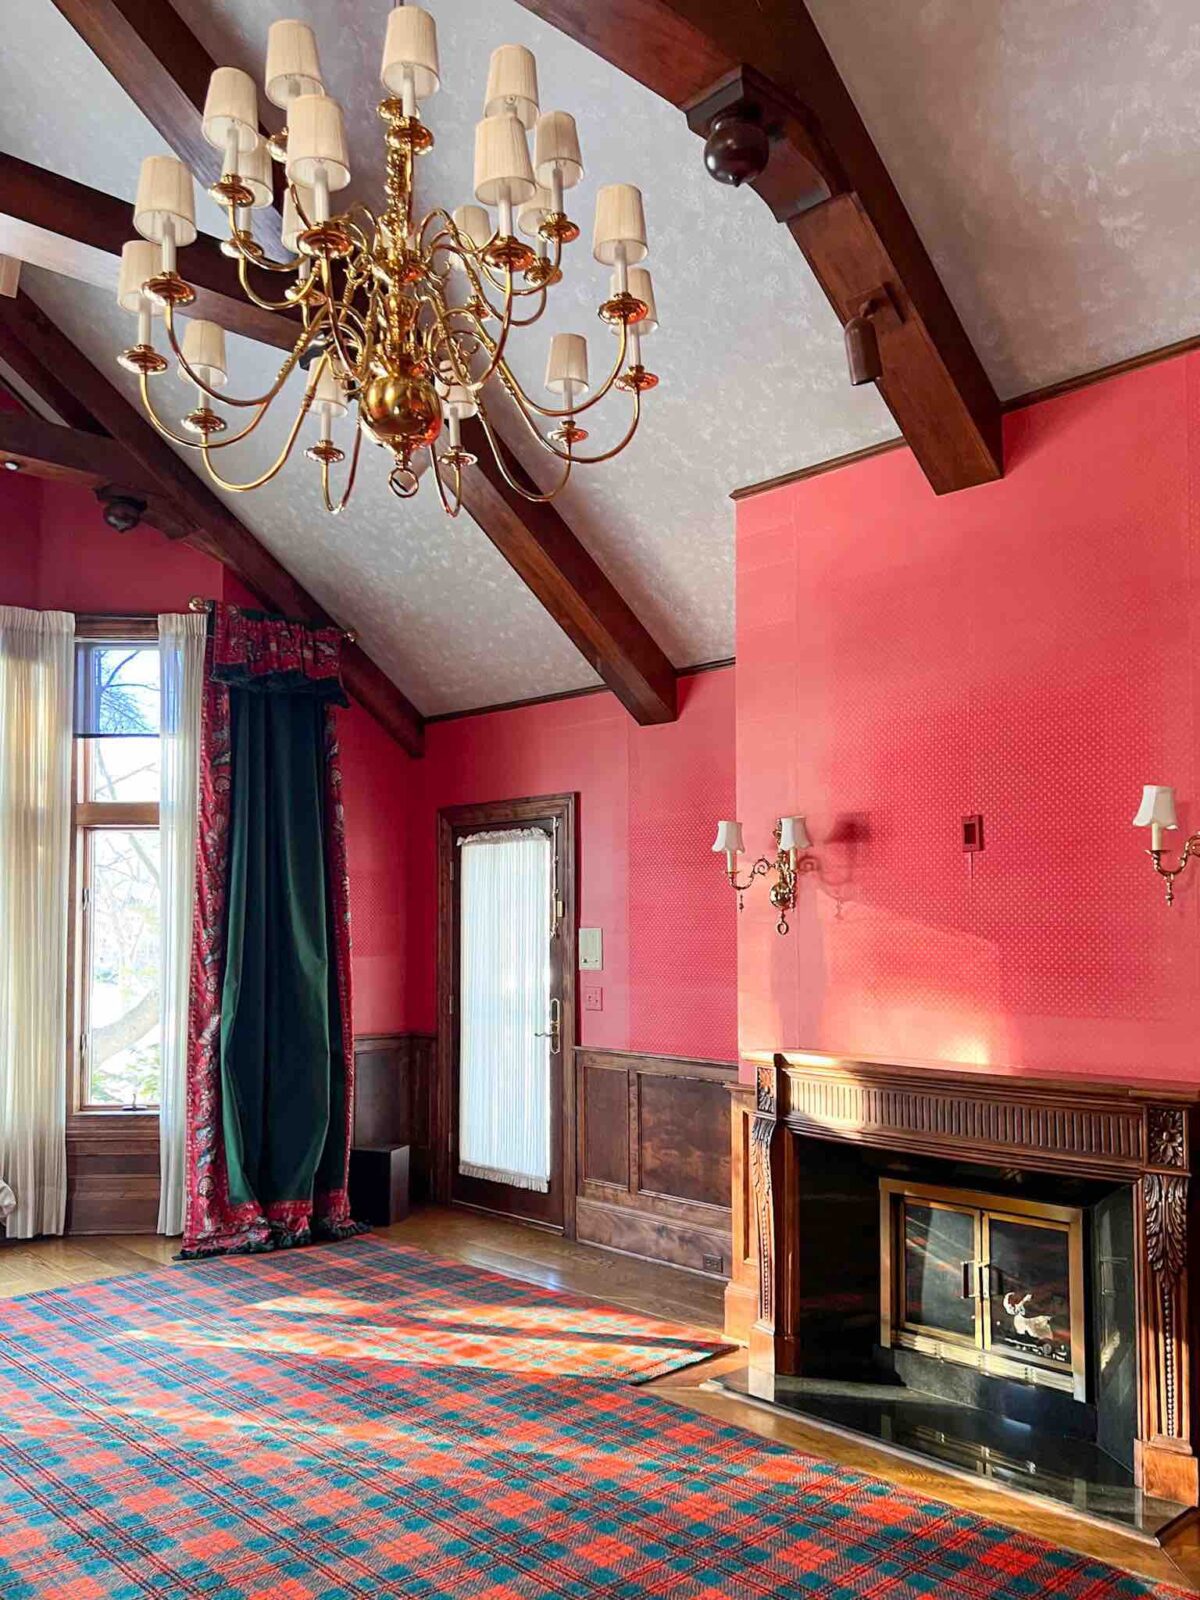 Room with high beamed ceilings, a large chandelier, red wallpaper, and a red and green rug